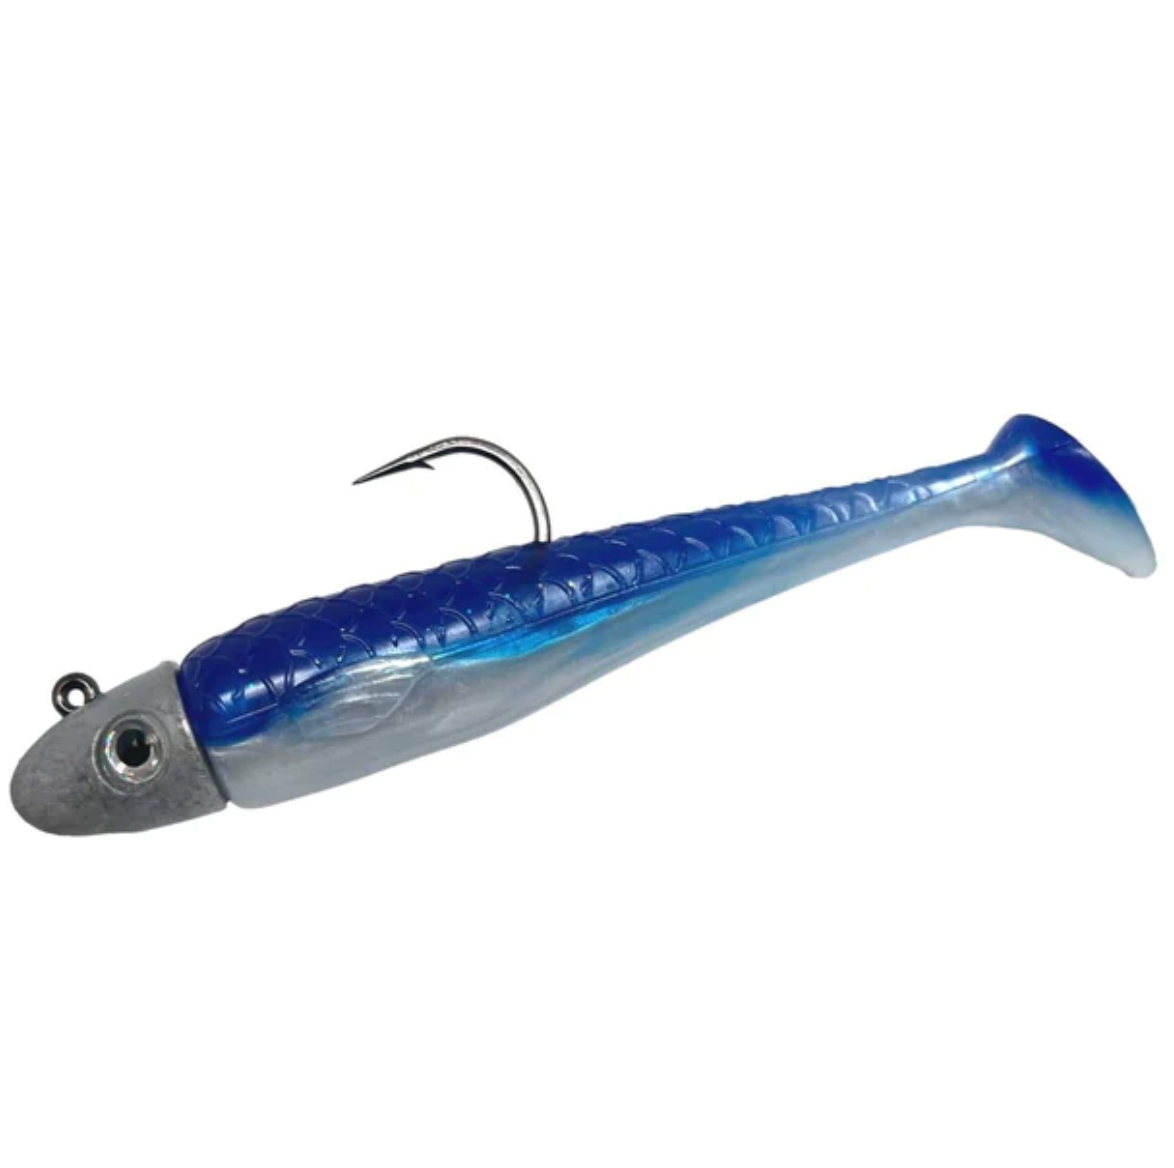 Sebile Puncher floating lure 85 mm 11.4 g - Nootica - Water addicts, like  you!